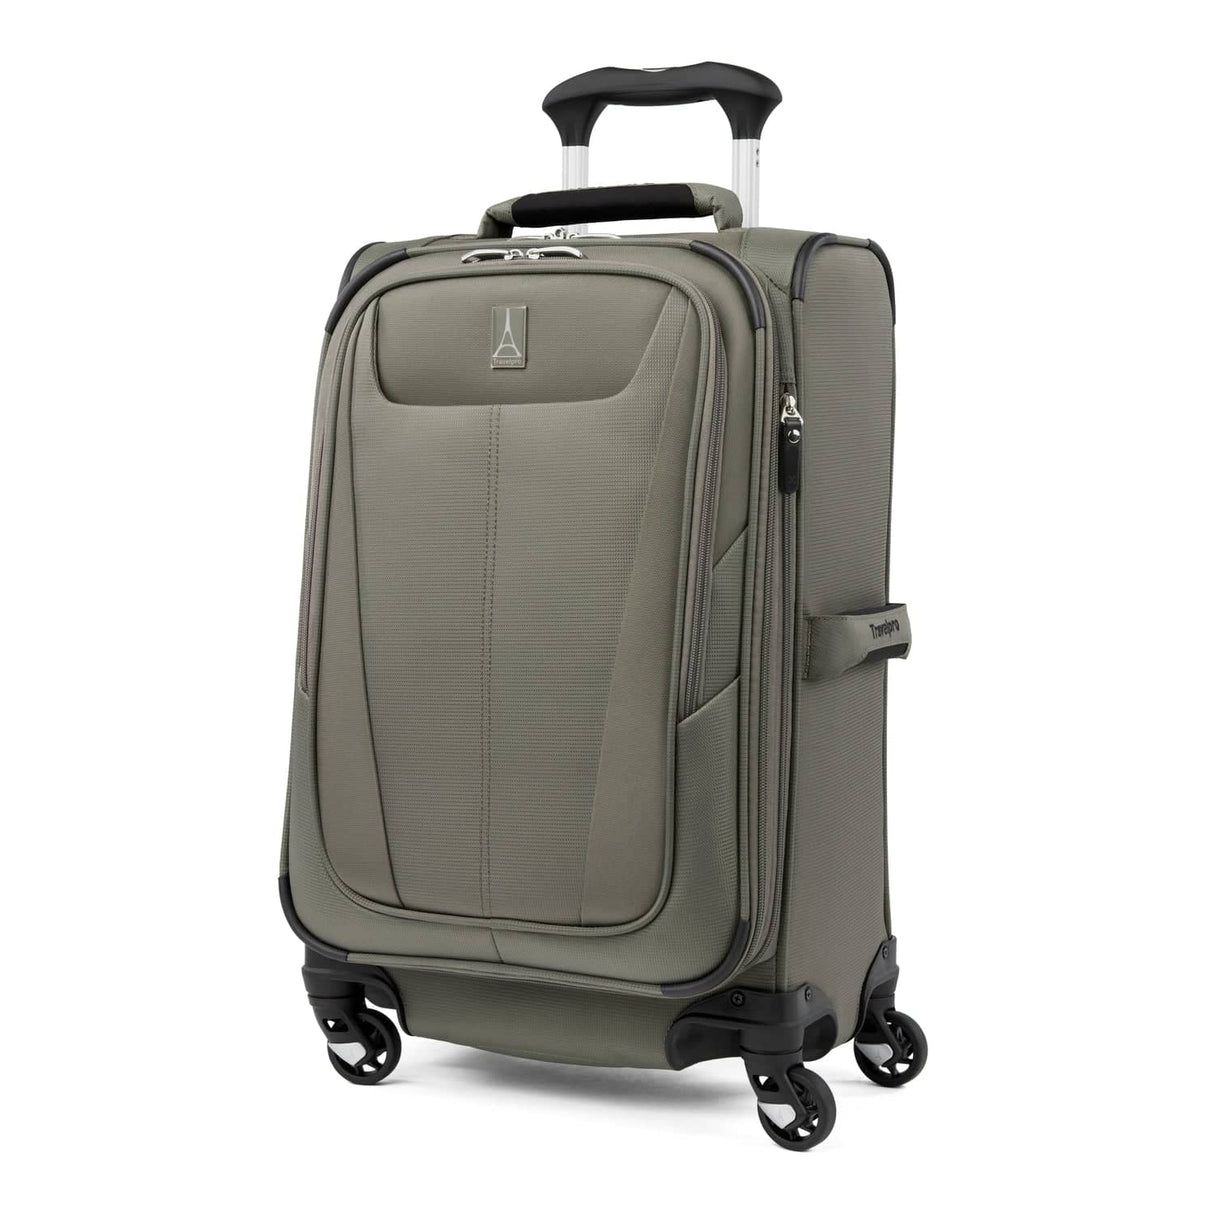 Travelpro Maxlite 5 21" Carry-On Expandable Spinner , Slate Green , 401176106_front-1500x1500-f3a2c67_1024x1024_2x_86c529ec-6494-47f1-8846-486674b57710